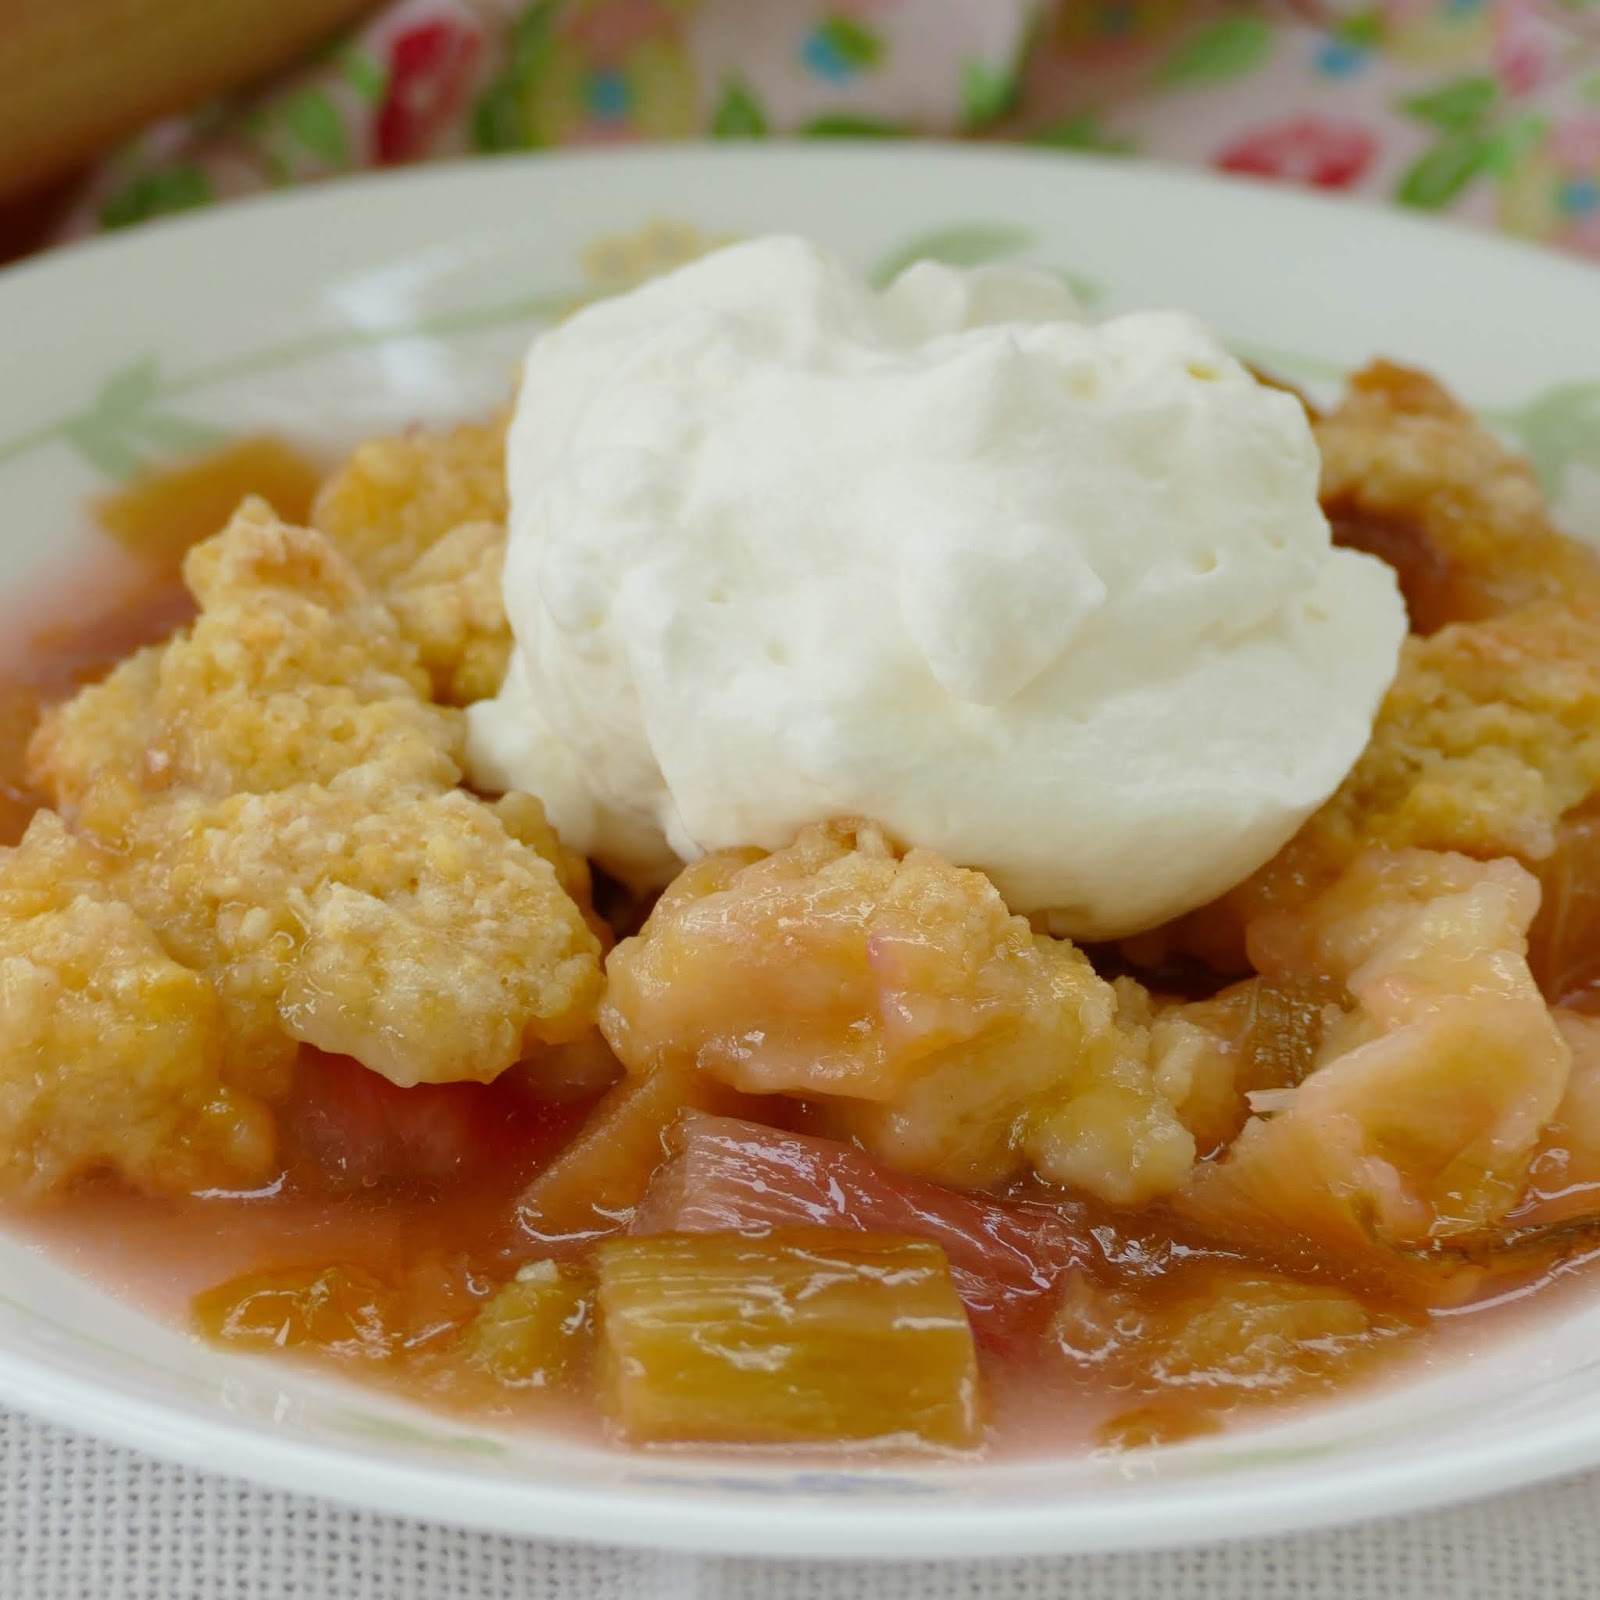 This lovely springtime rhubarb dessert couldn't be any easier! Simple ingredients, ready in less than an hour and so good with the sweet and tangy flavors!